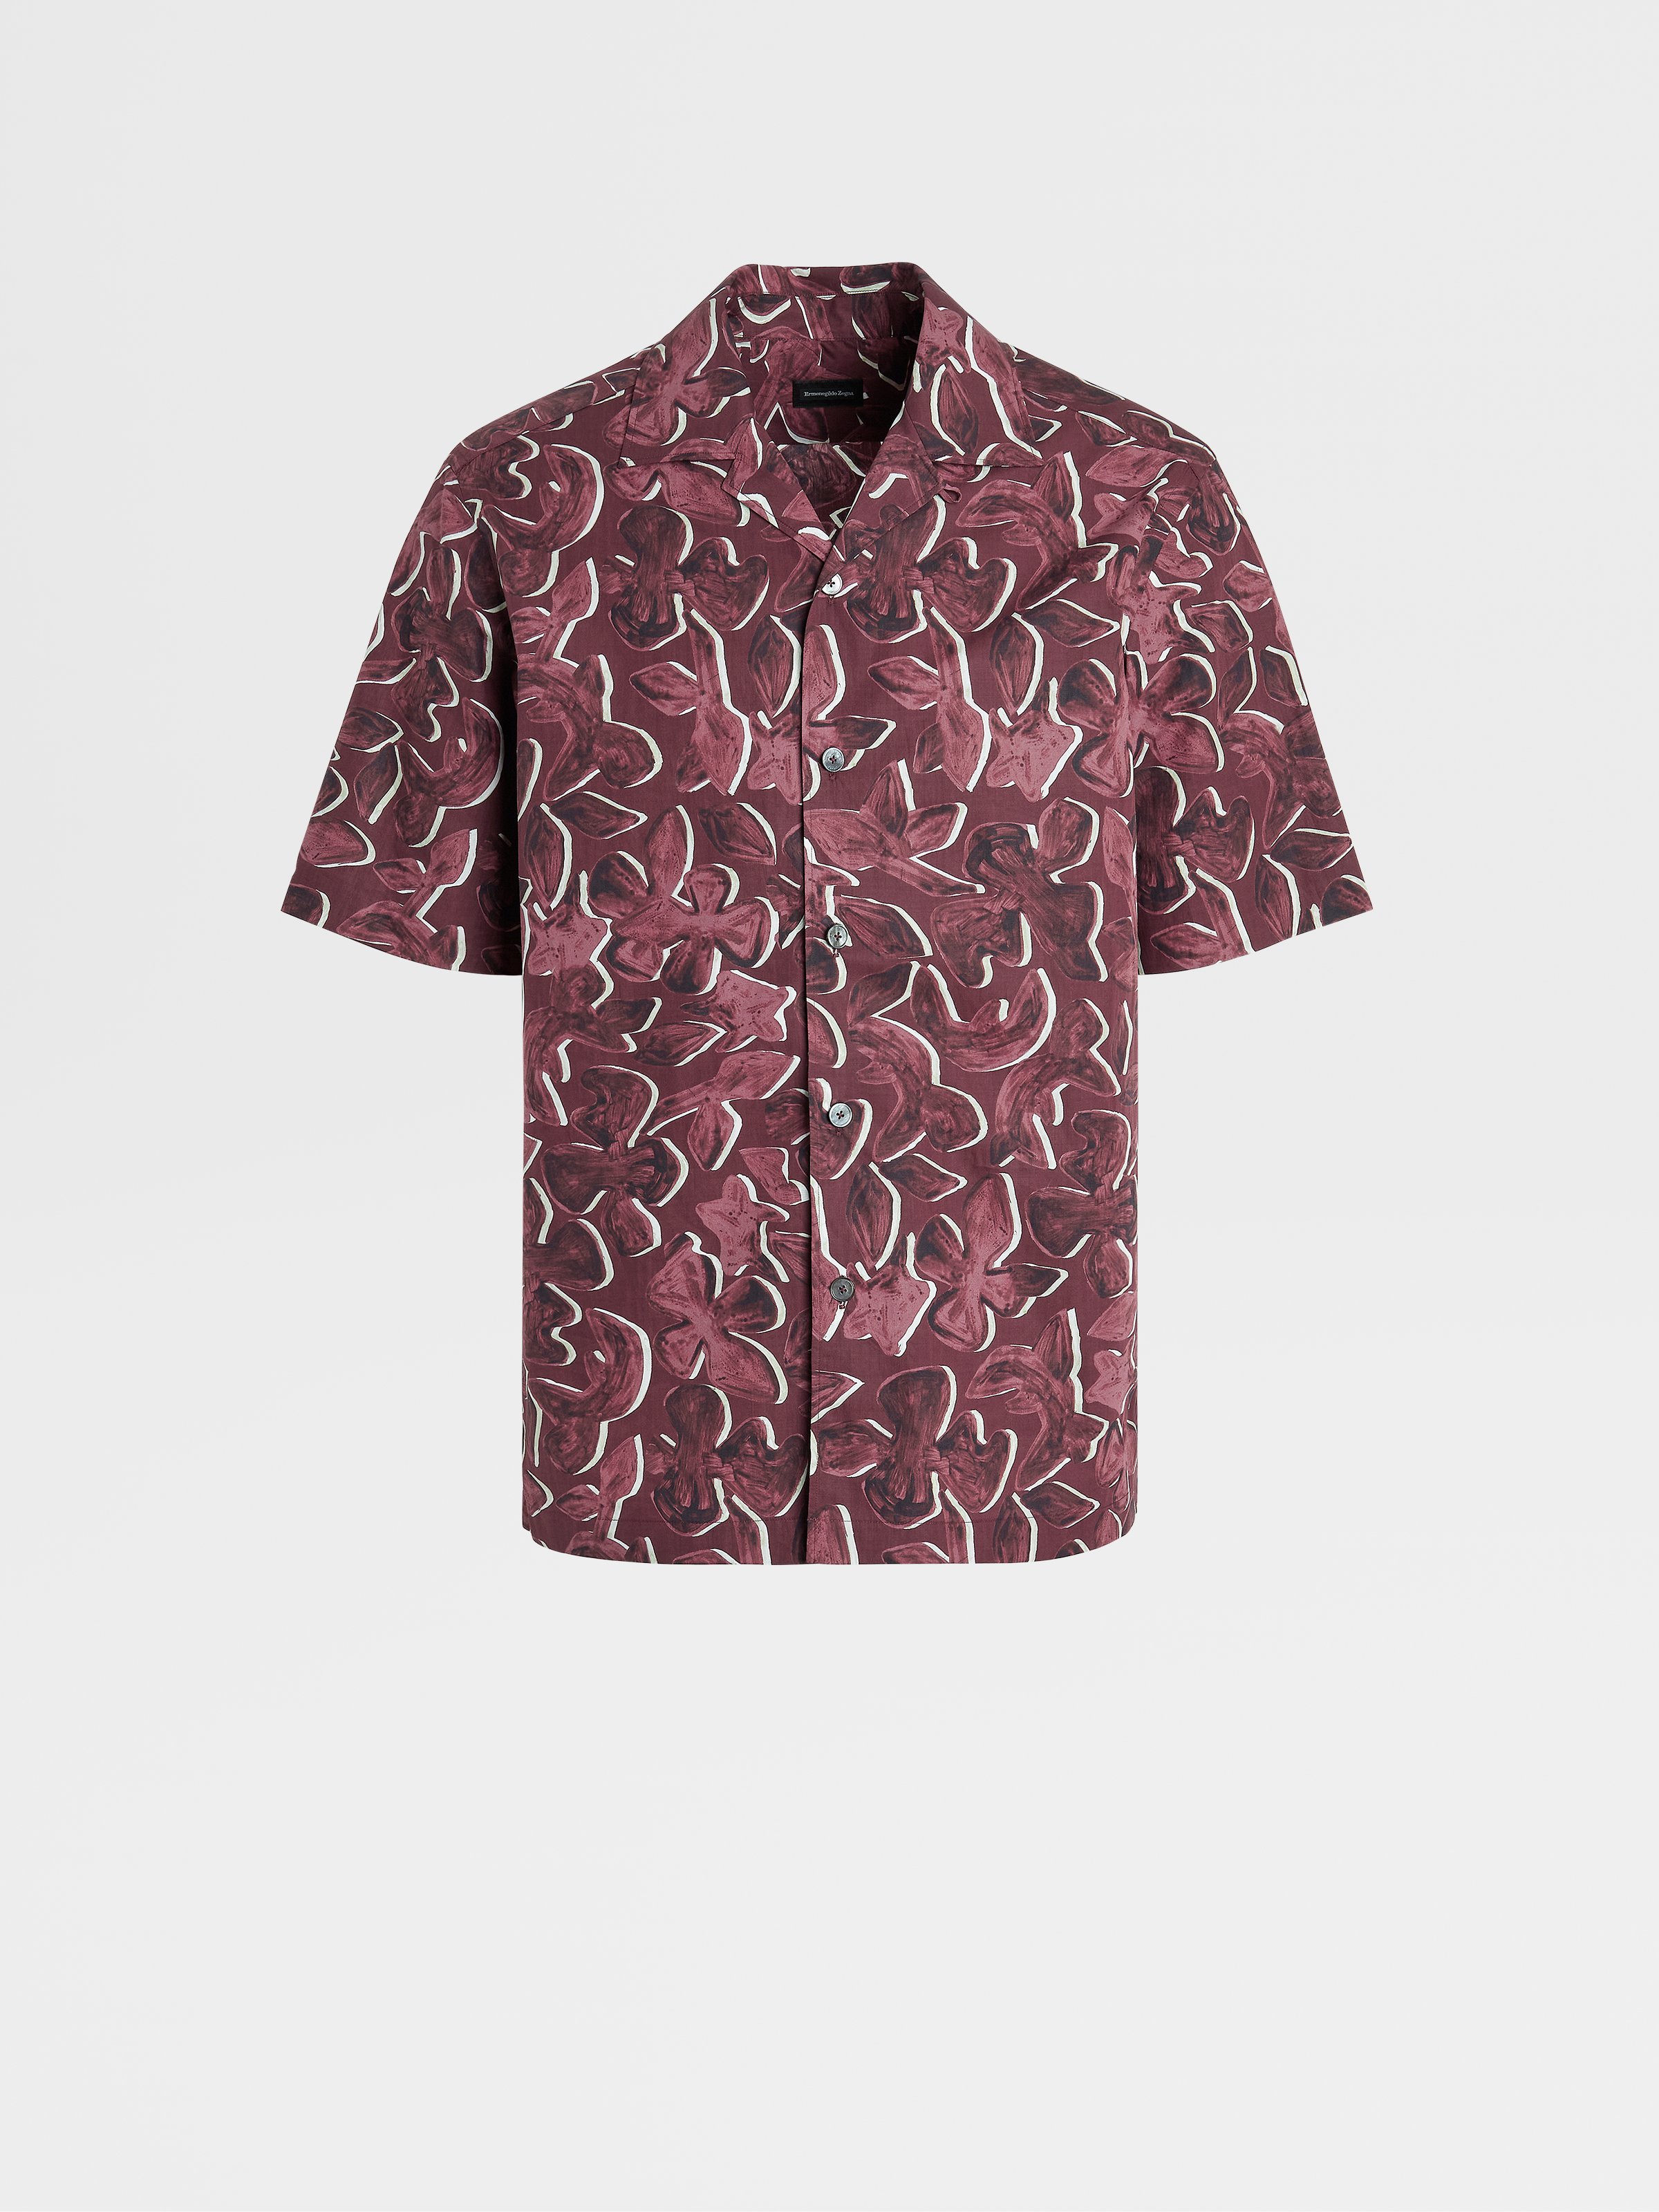 UZX49-SCP3-002-F Dark red and off white printed pure cotton short-sleeved shirt with cuban collar P36,200.jpg